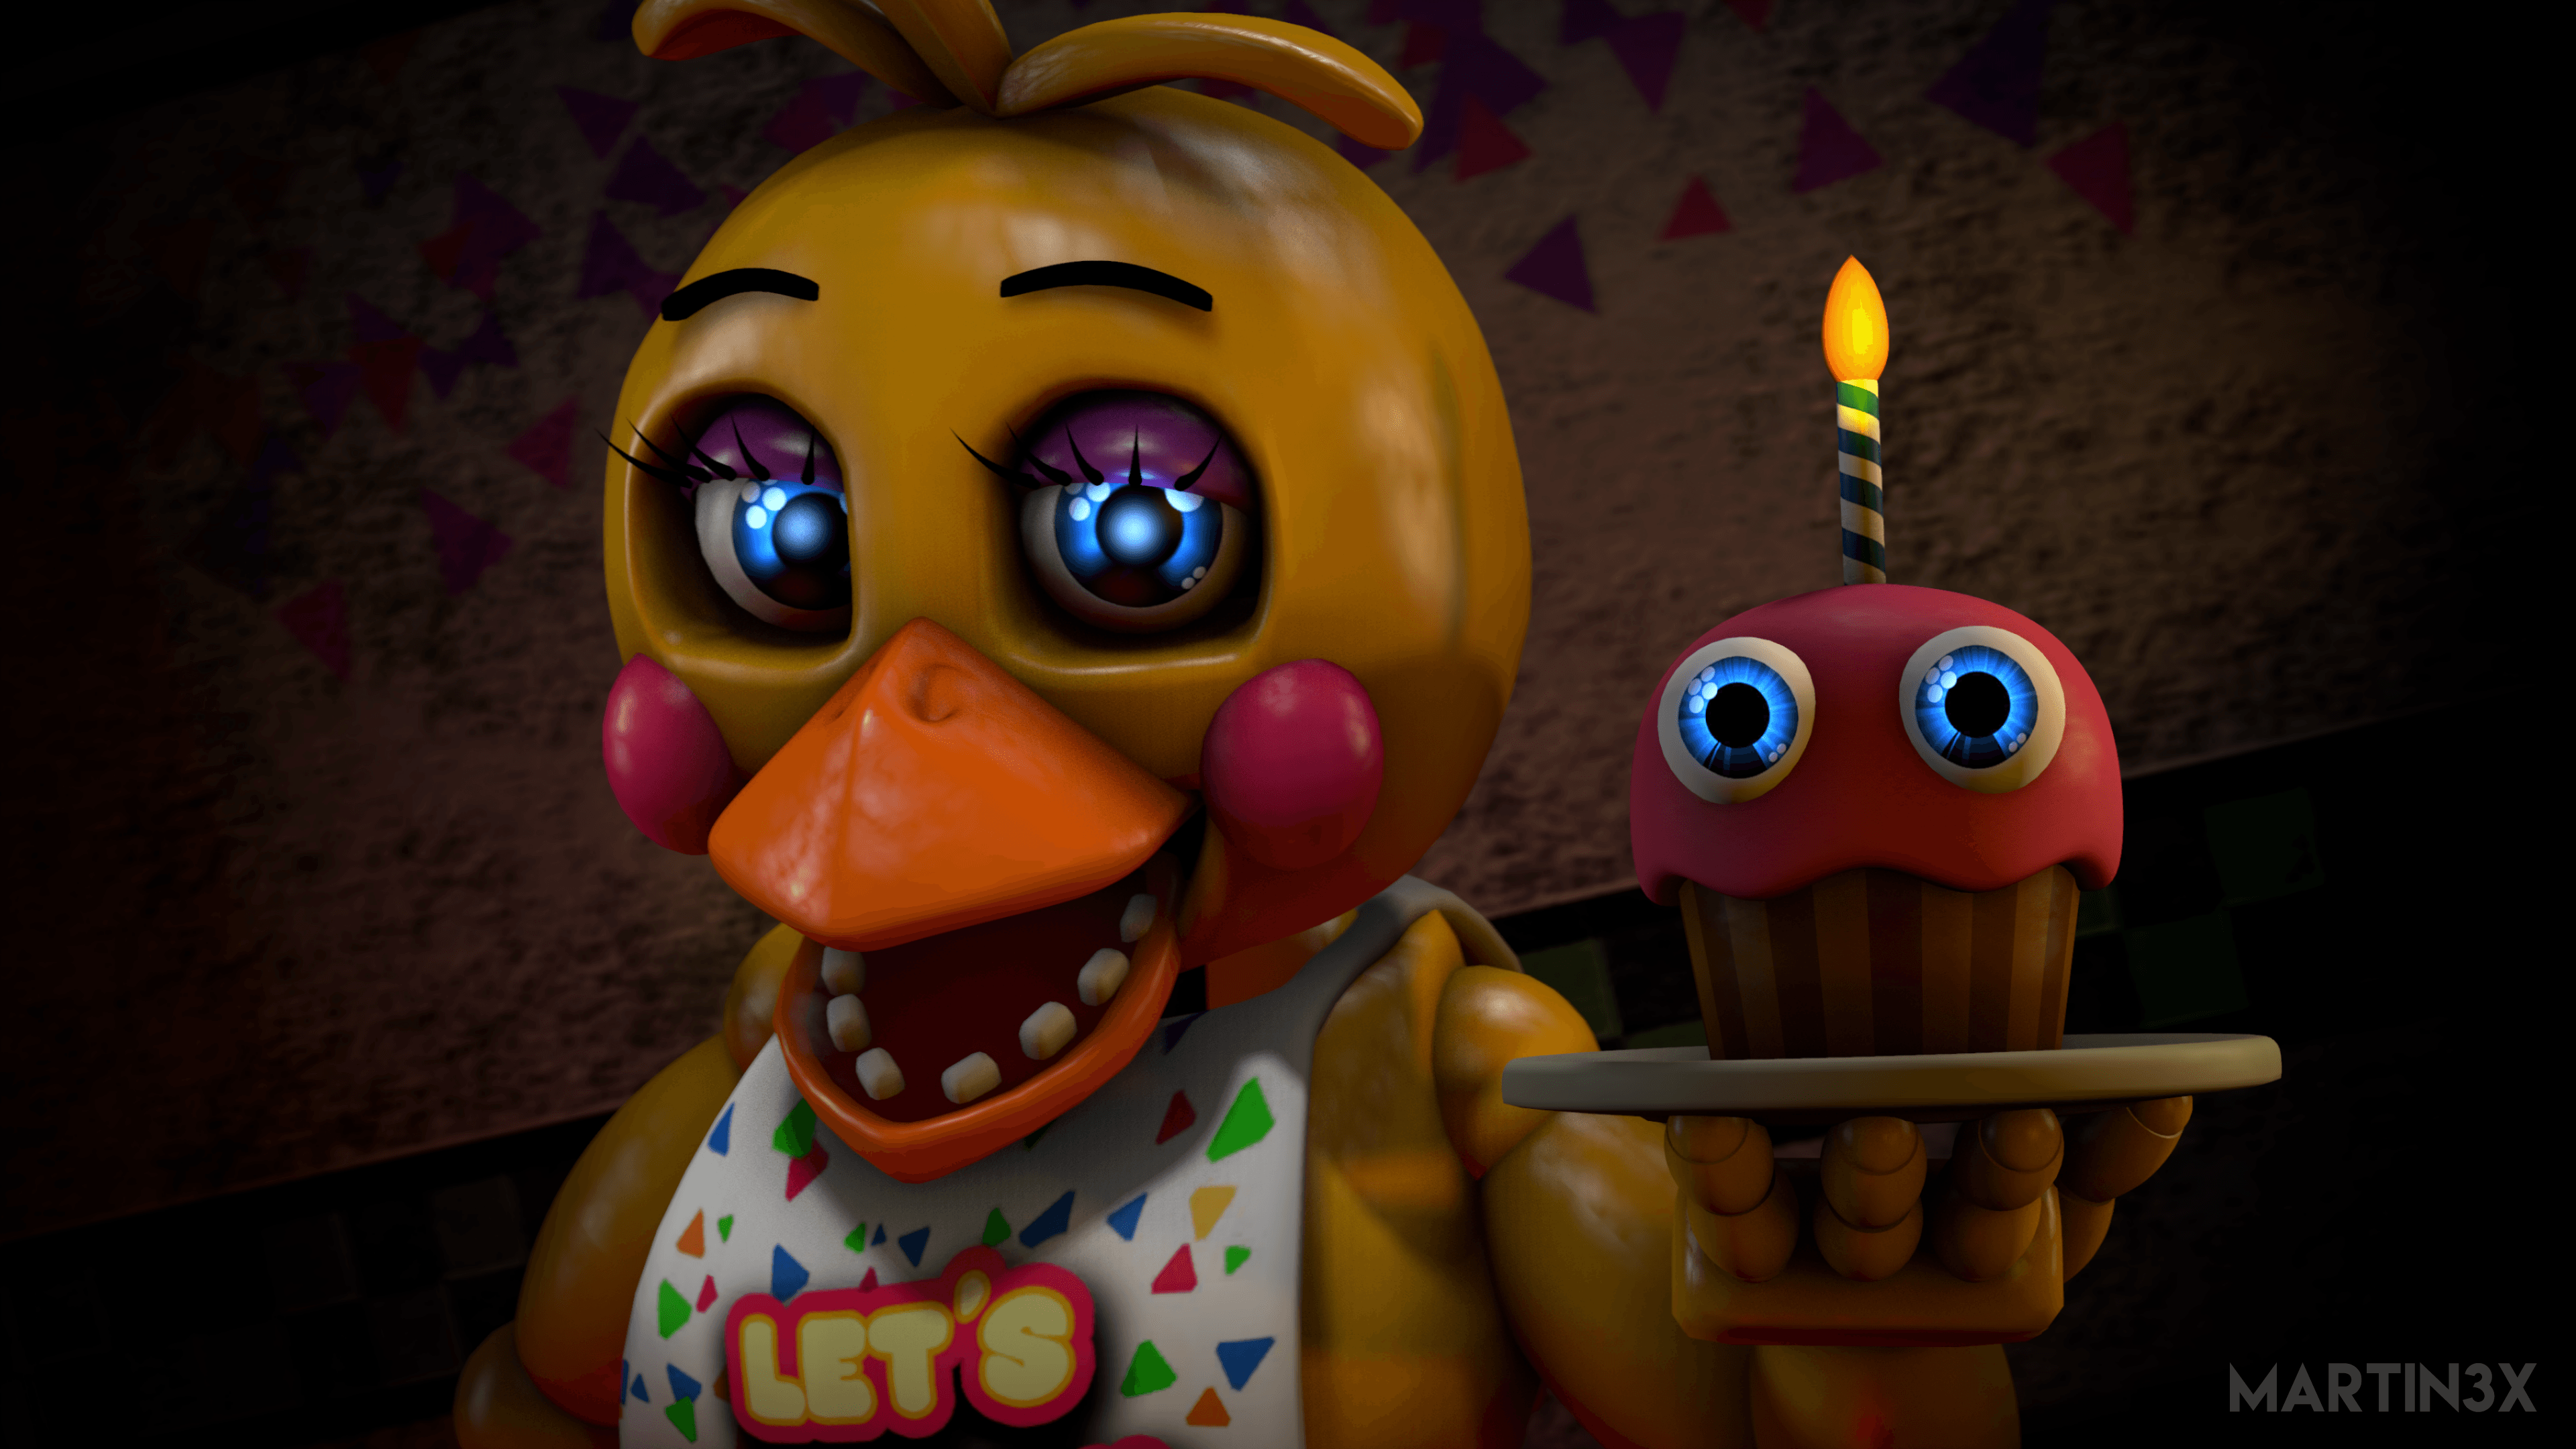 Freddy's chica. Five Nights at Freddy's чика. Five Nights at Freddy's 2 чика. Той чика ФНАФ 2. Five Nights at Freddy's 1 чика.